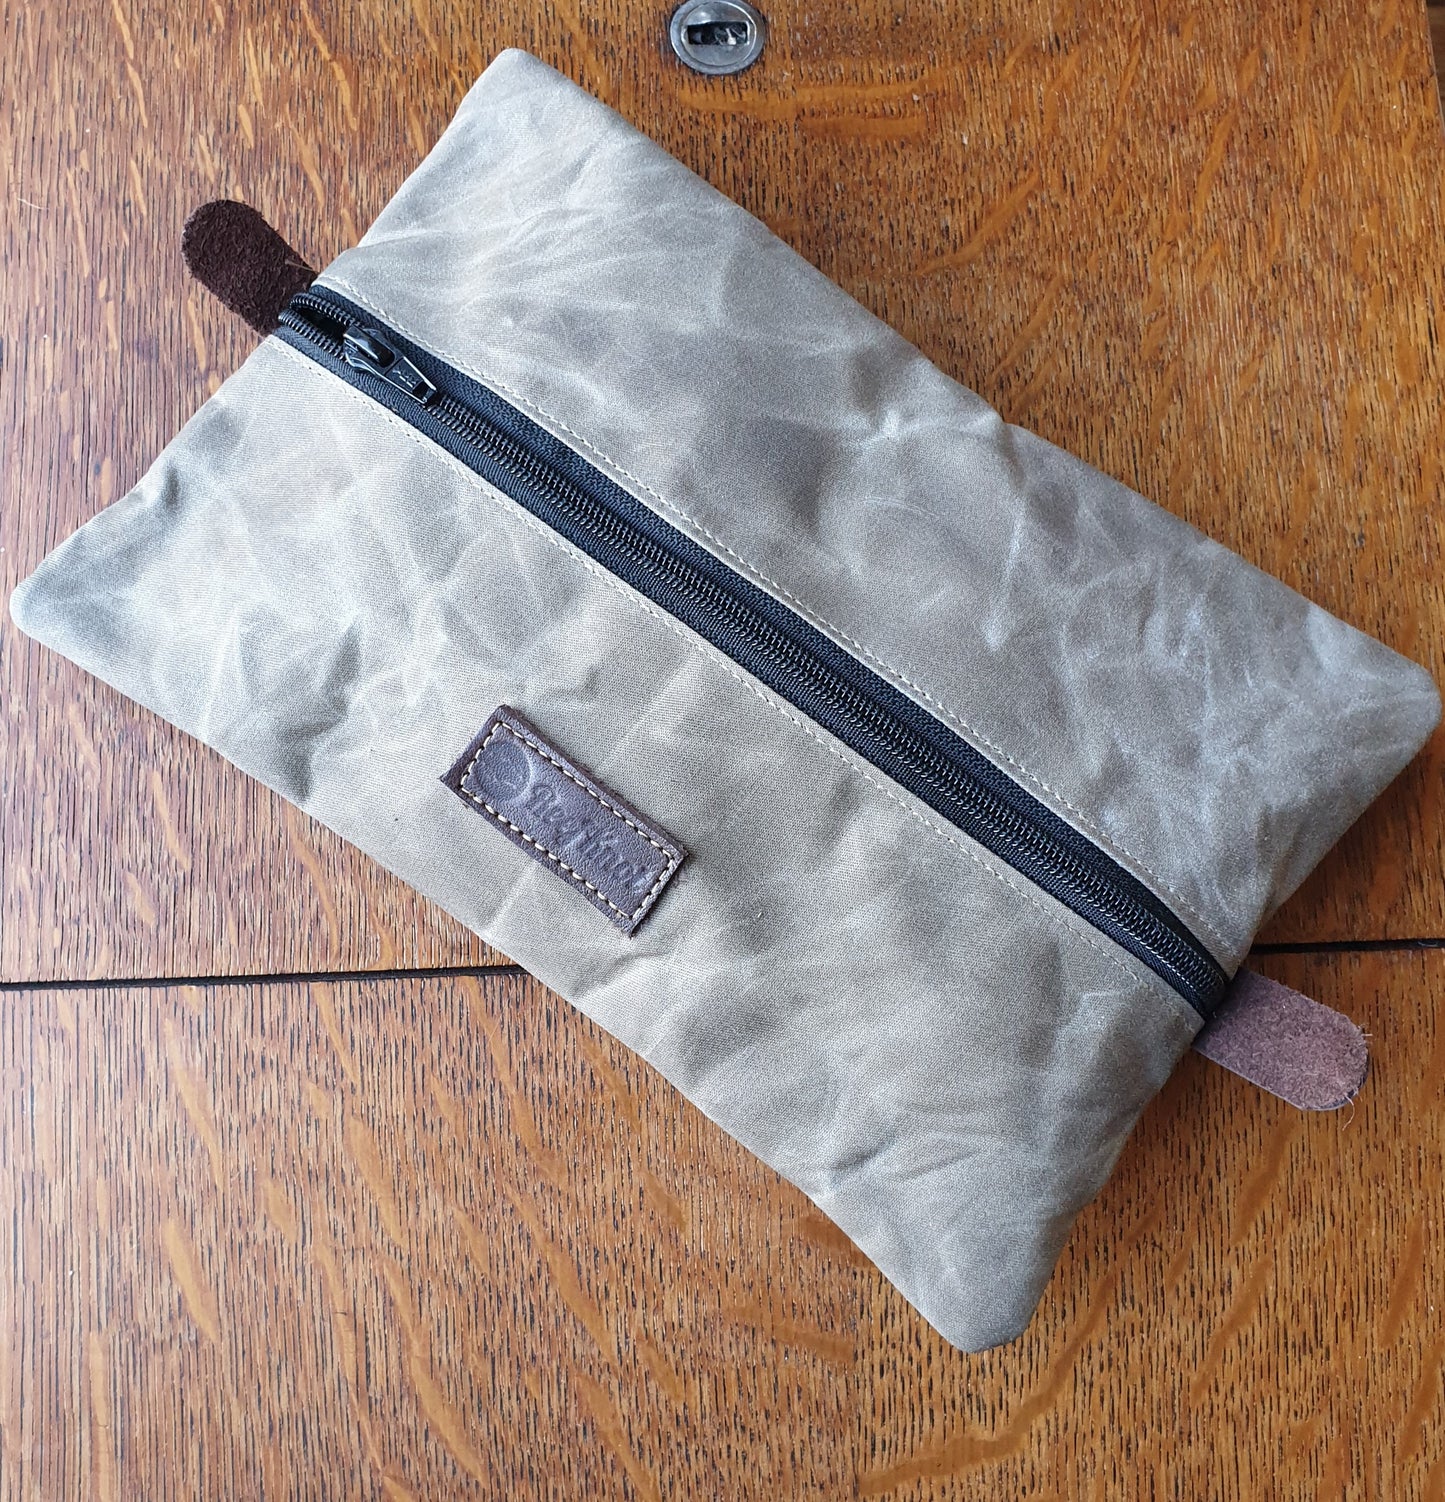 Waxed Canvas pouch to be used as dopp kit or travel gear bag and or as headphone and cables case